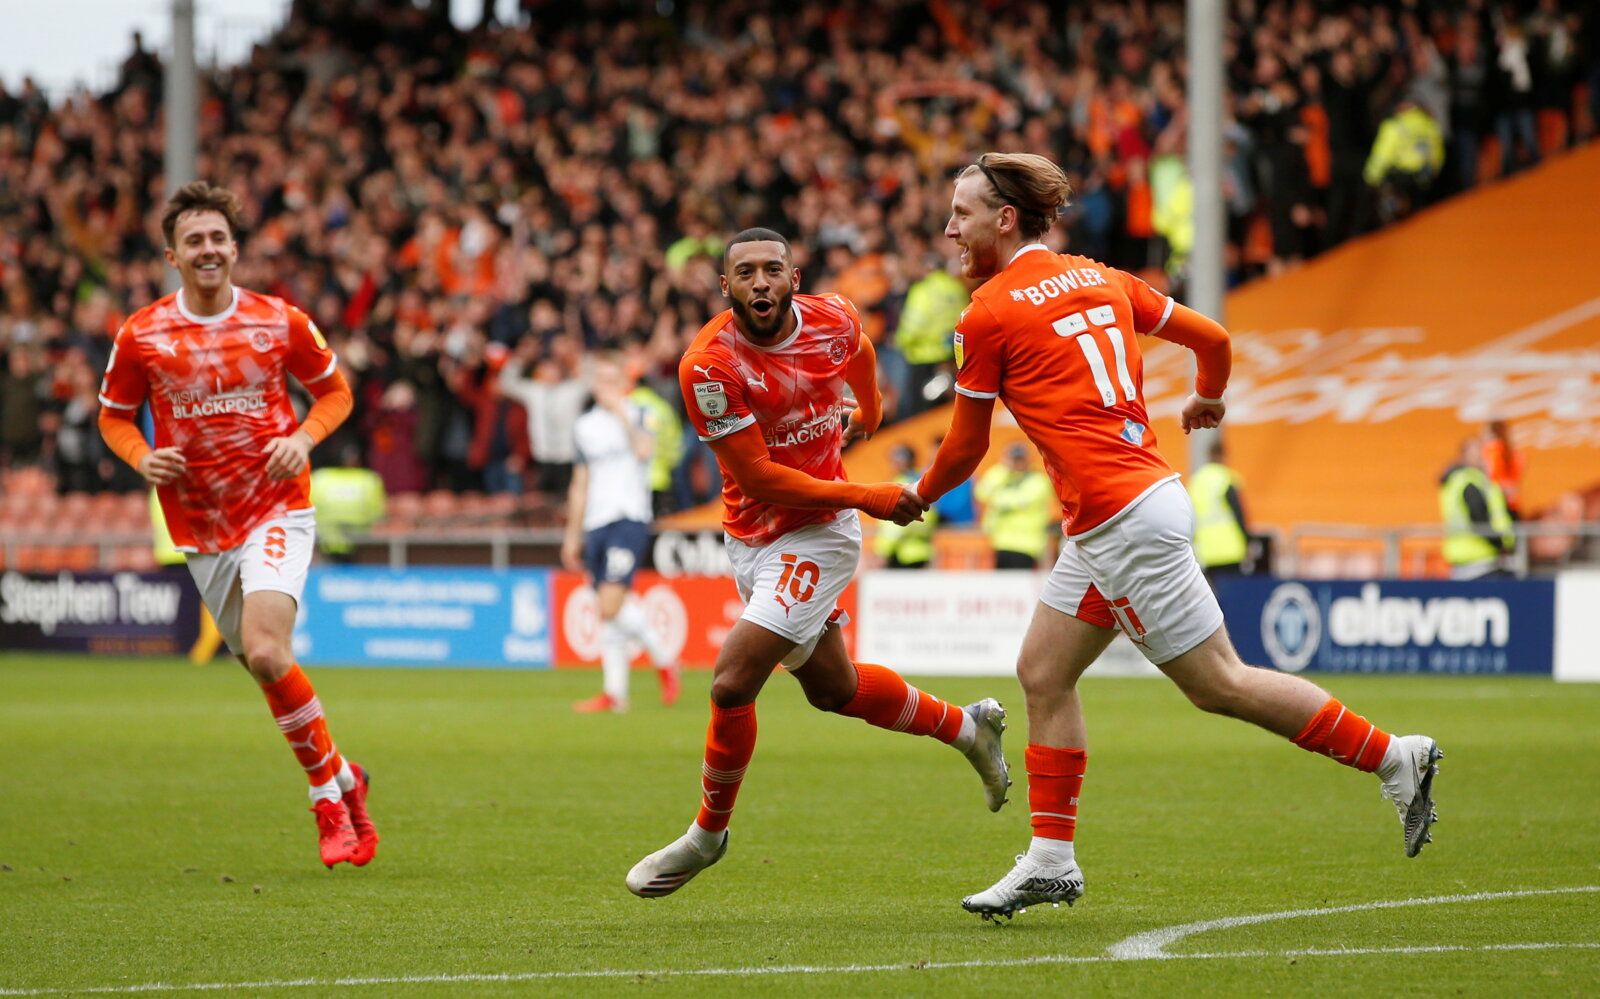 Soccer Football - Championship - Blackpool v Preston North End - Bloomfield Road, Blackpool, Britain - October 23, 2021 Blackpool's Keshi Anderson celebrates scoring his side's first goal Action Images/Ed Sykes  EDITORIAL USE ONLY. No use with unauthorized audio, video, data, fixture lists, club/league logos or 